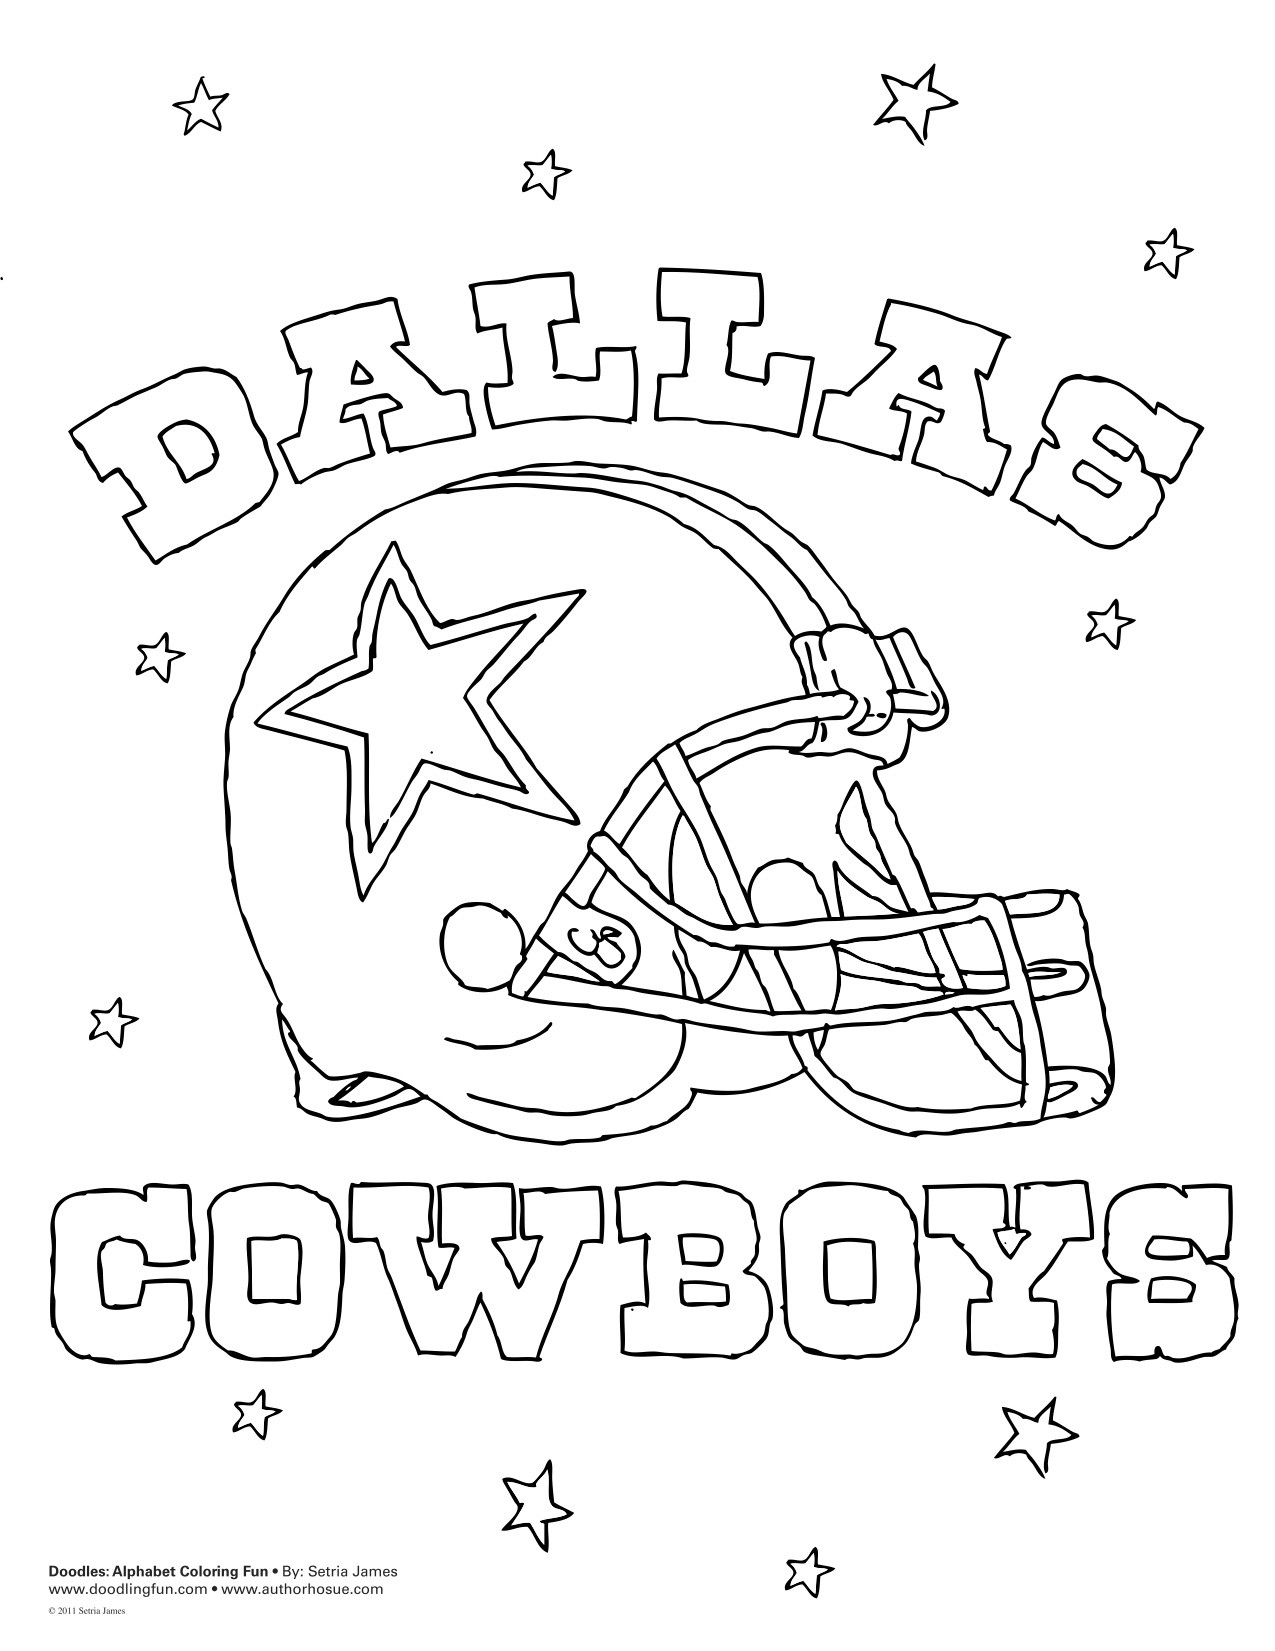 Dallas Cowboys Coloring Pages To Print
 Football Fans Coloring Sheet